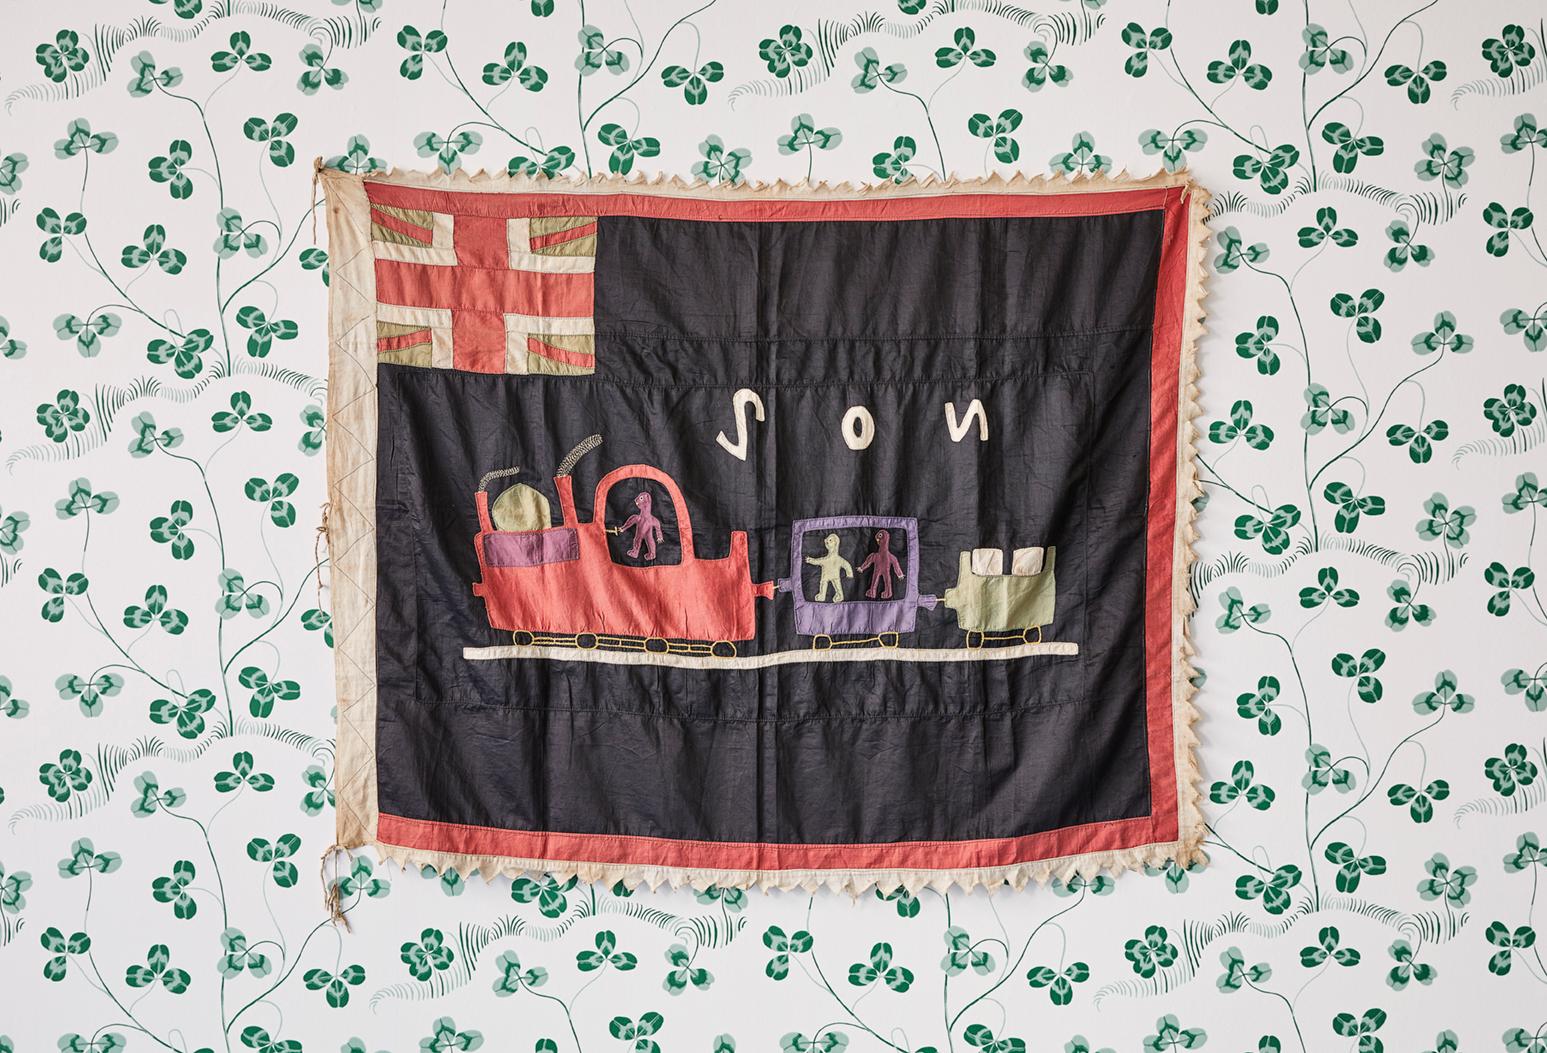 Asafo flag “The train is always ready to go” in cotton applique patters. Trains were a dramatic expression of power, regularity and reliability and as such were a popular theme on Fante Asafo flags after the first railway was built in Ghana in 1901.